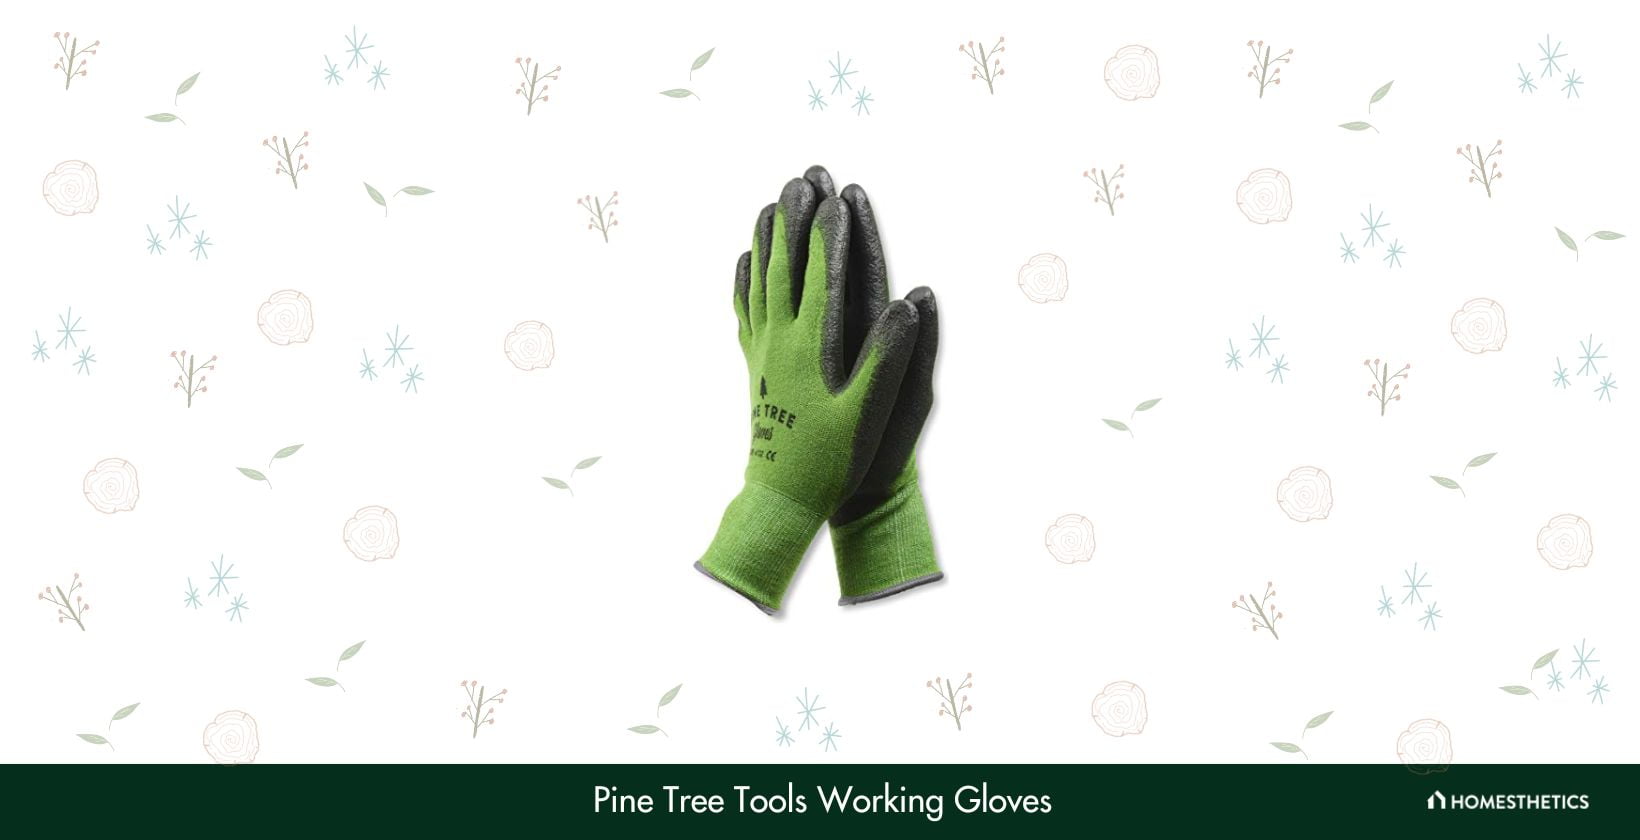 Pine Tree Tools Working Gloves